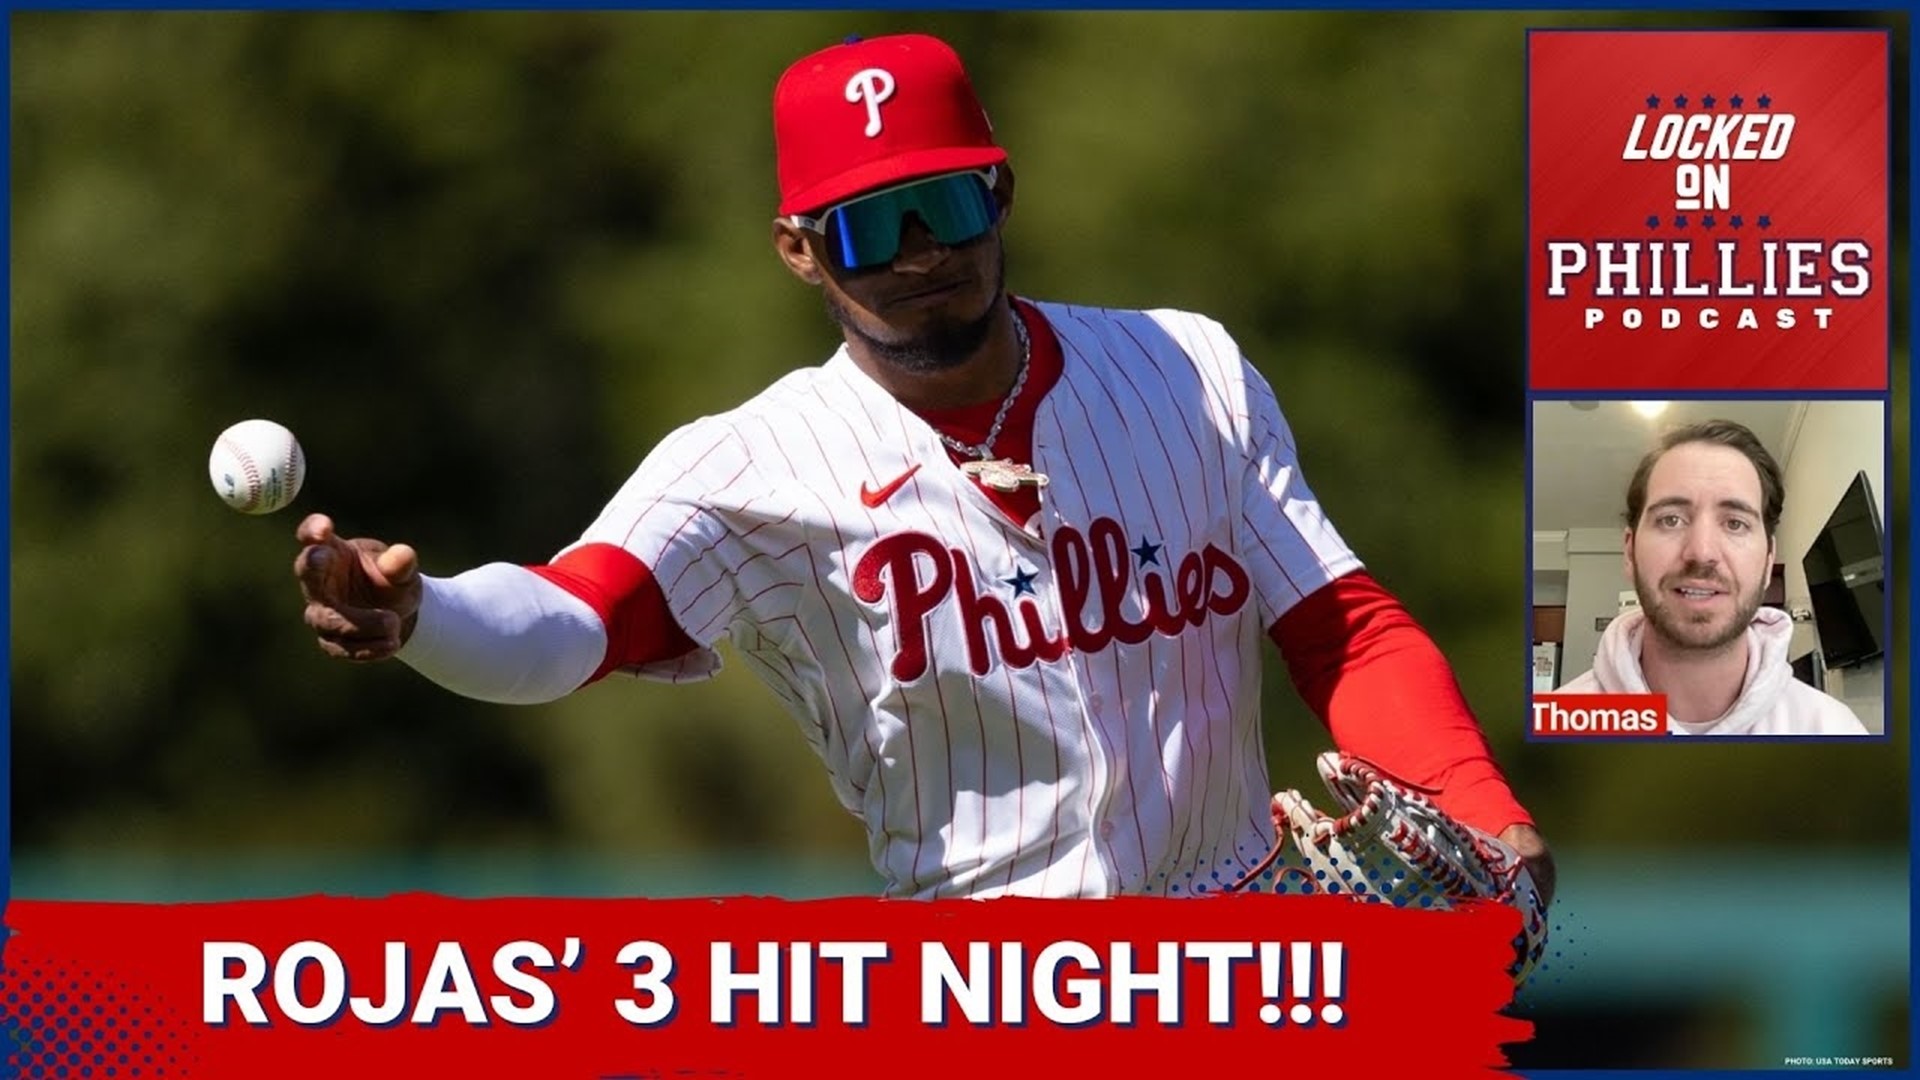 In today's episode, Connor is ecstatic about Johan Rojas' big night for the Philadelphia Phillies.